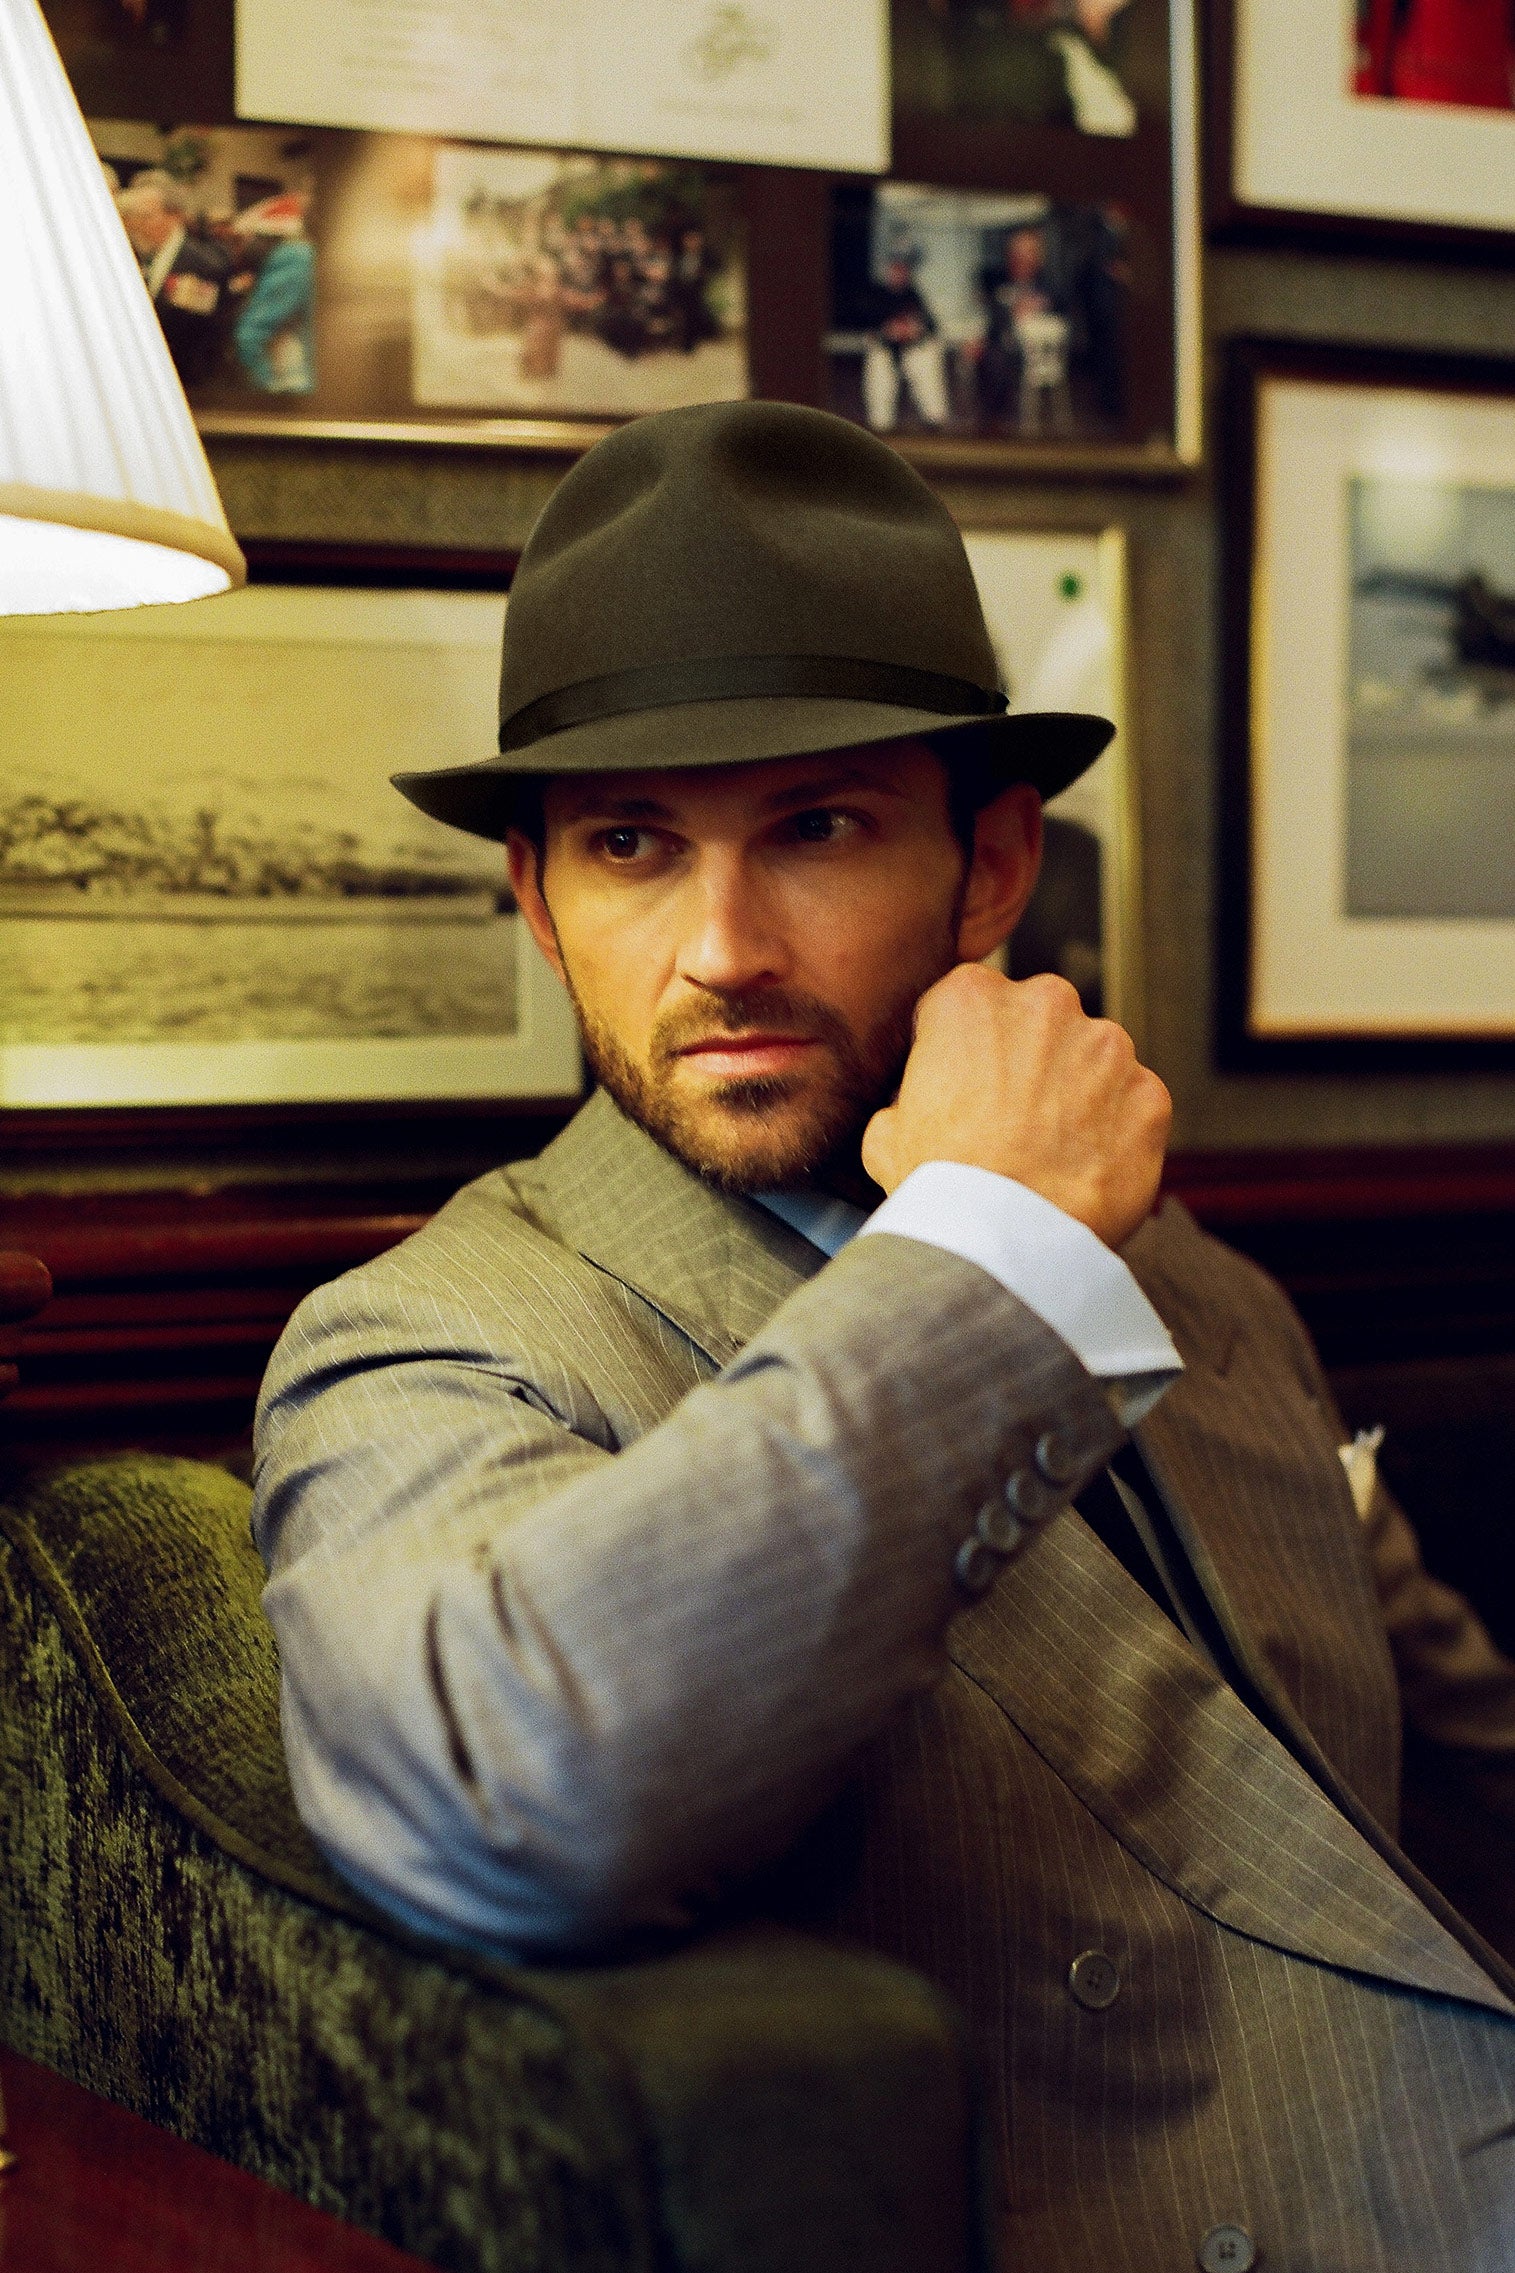 The James Trilby - Best Selling Hats - Lock & Co. Hatters London UK